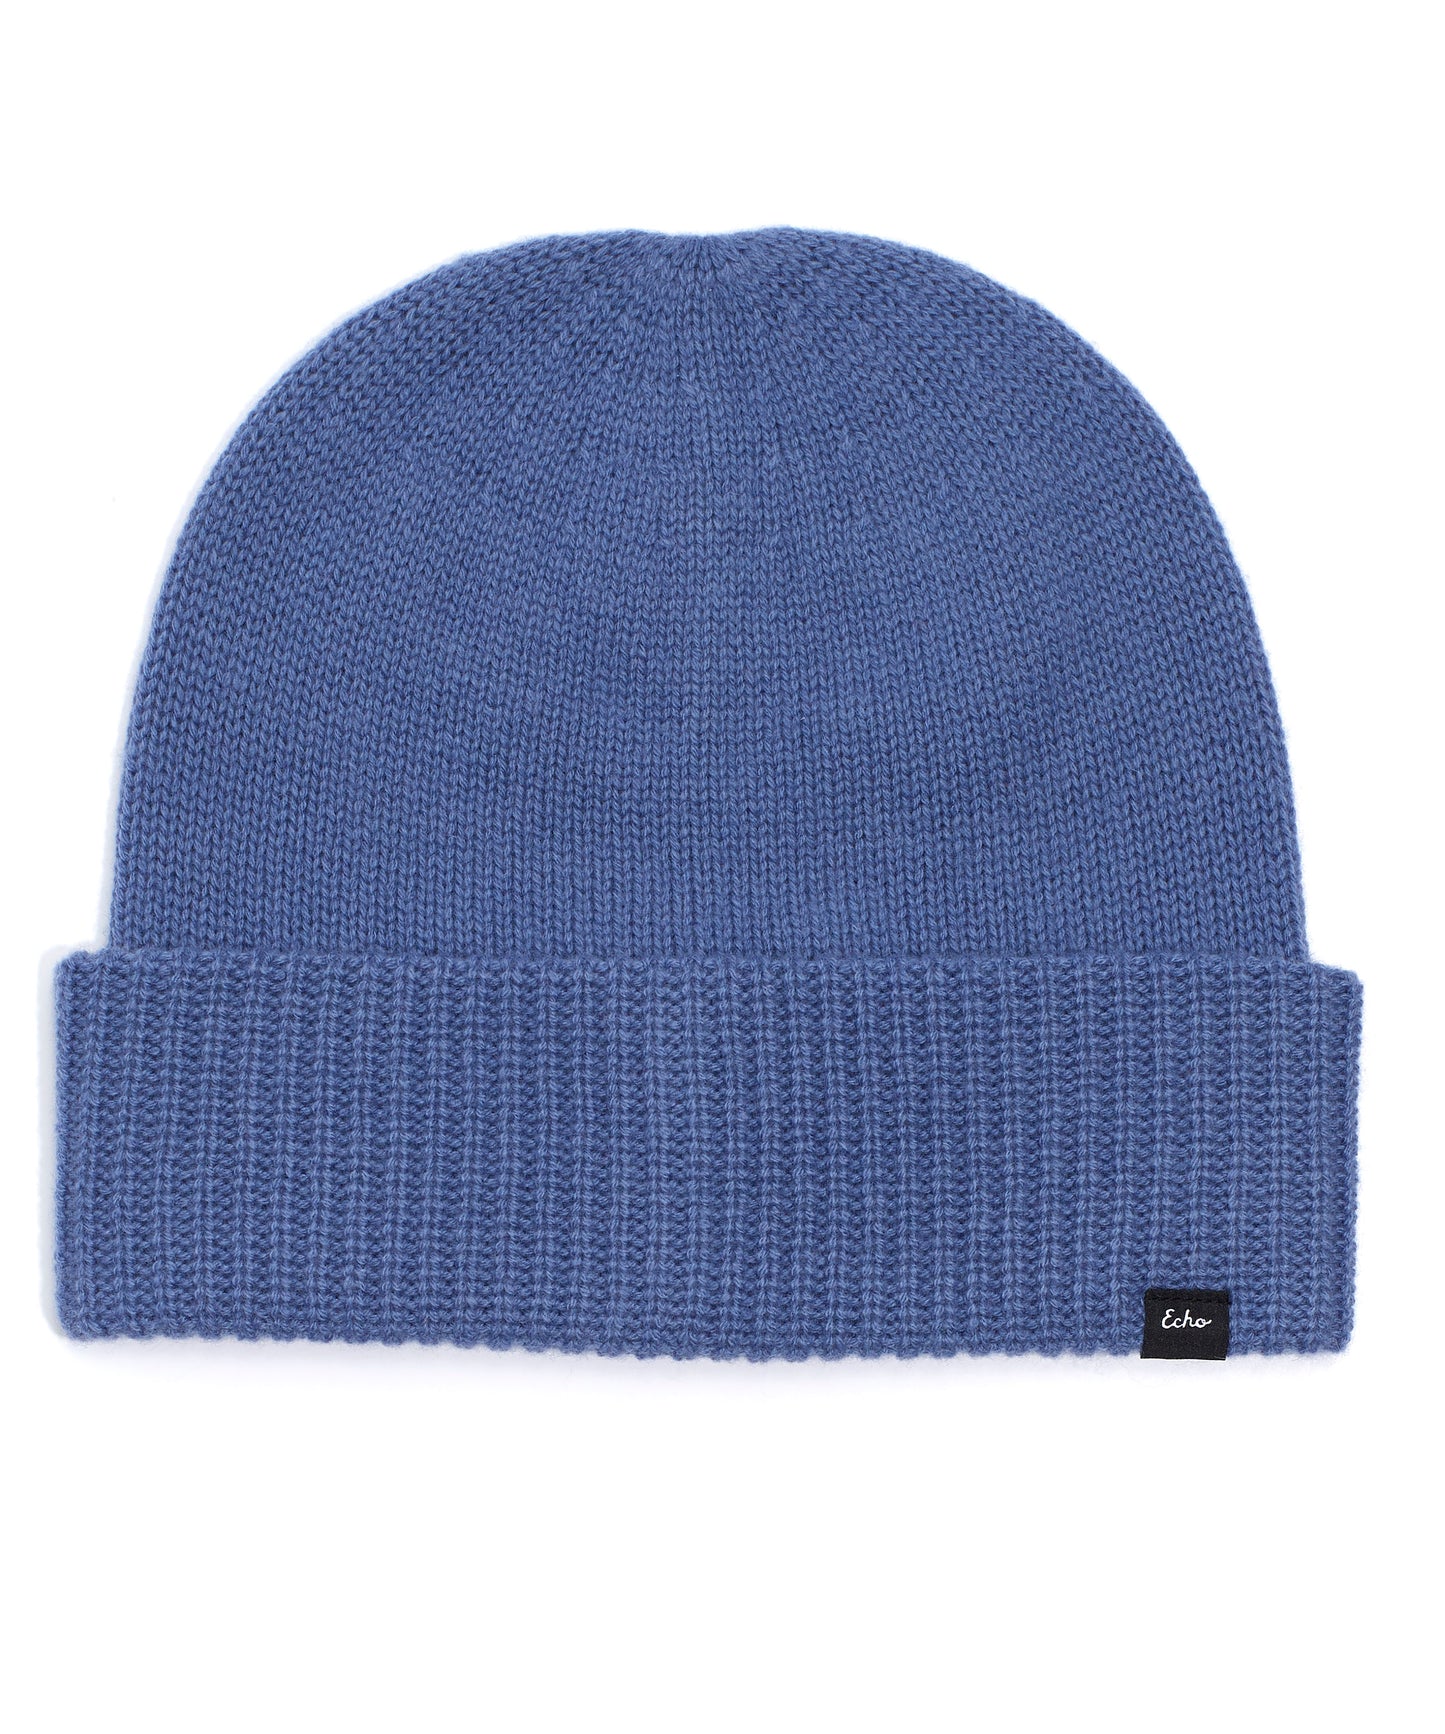 Wool/Cashmere Lofty Beanie in color Storm Blue